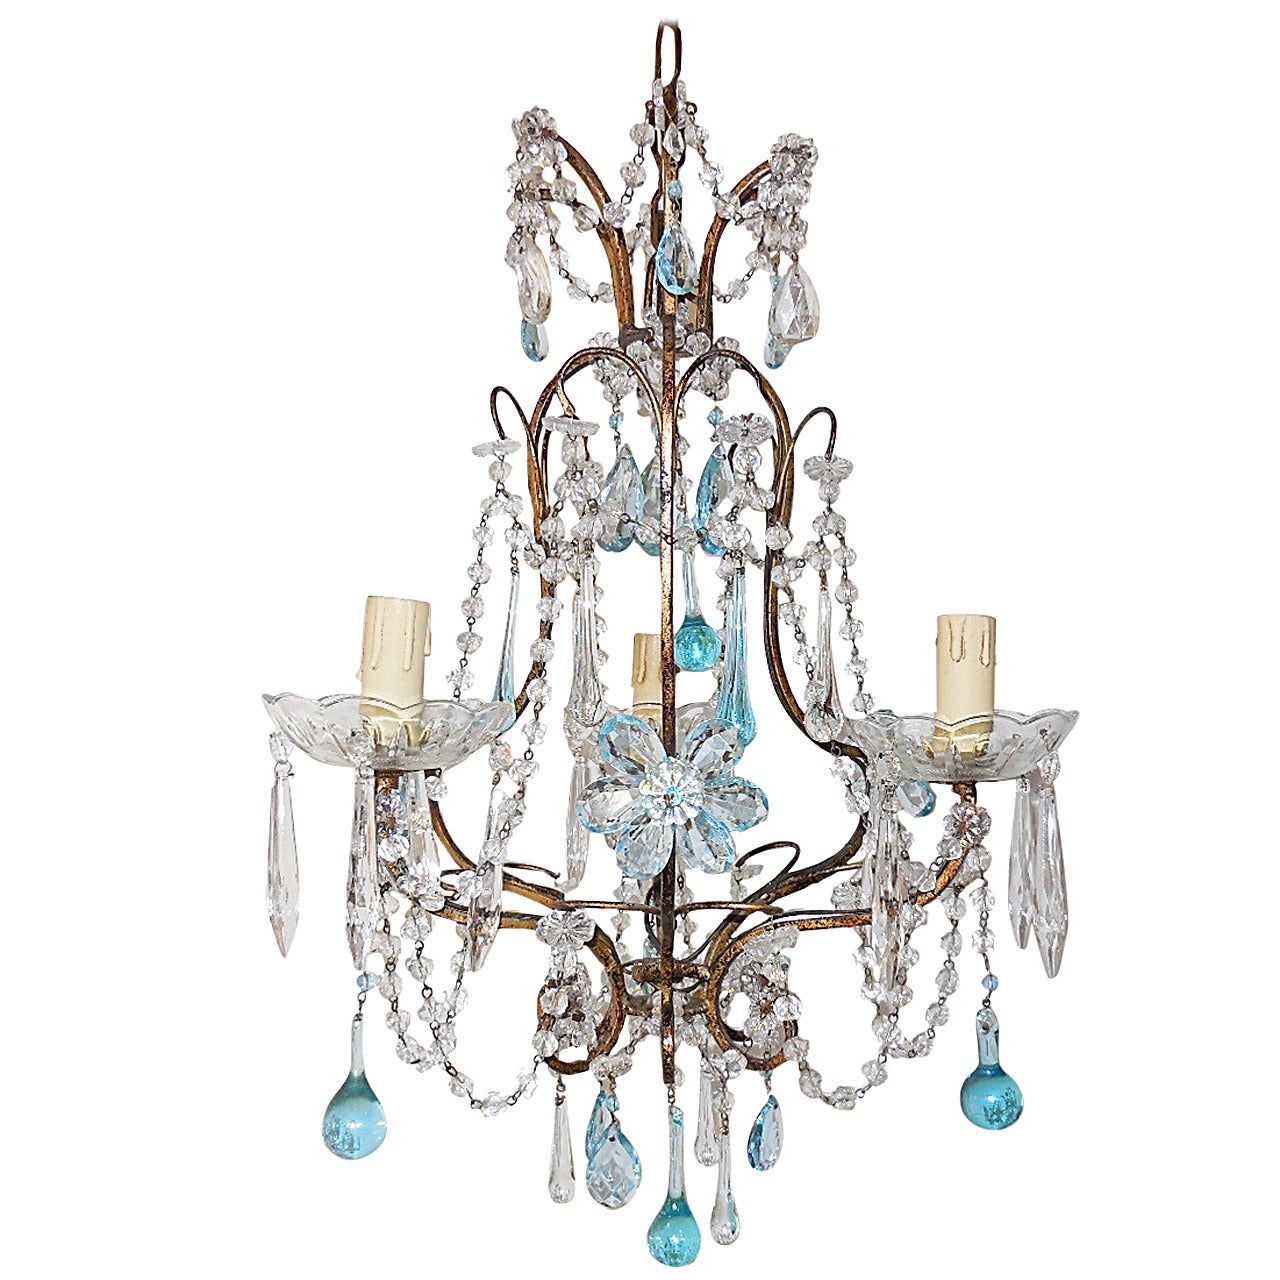 French Aqua Crystal Prisms, Drops and Flowers Chandelier, circa 1920